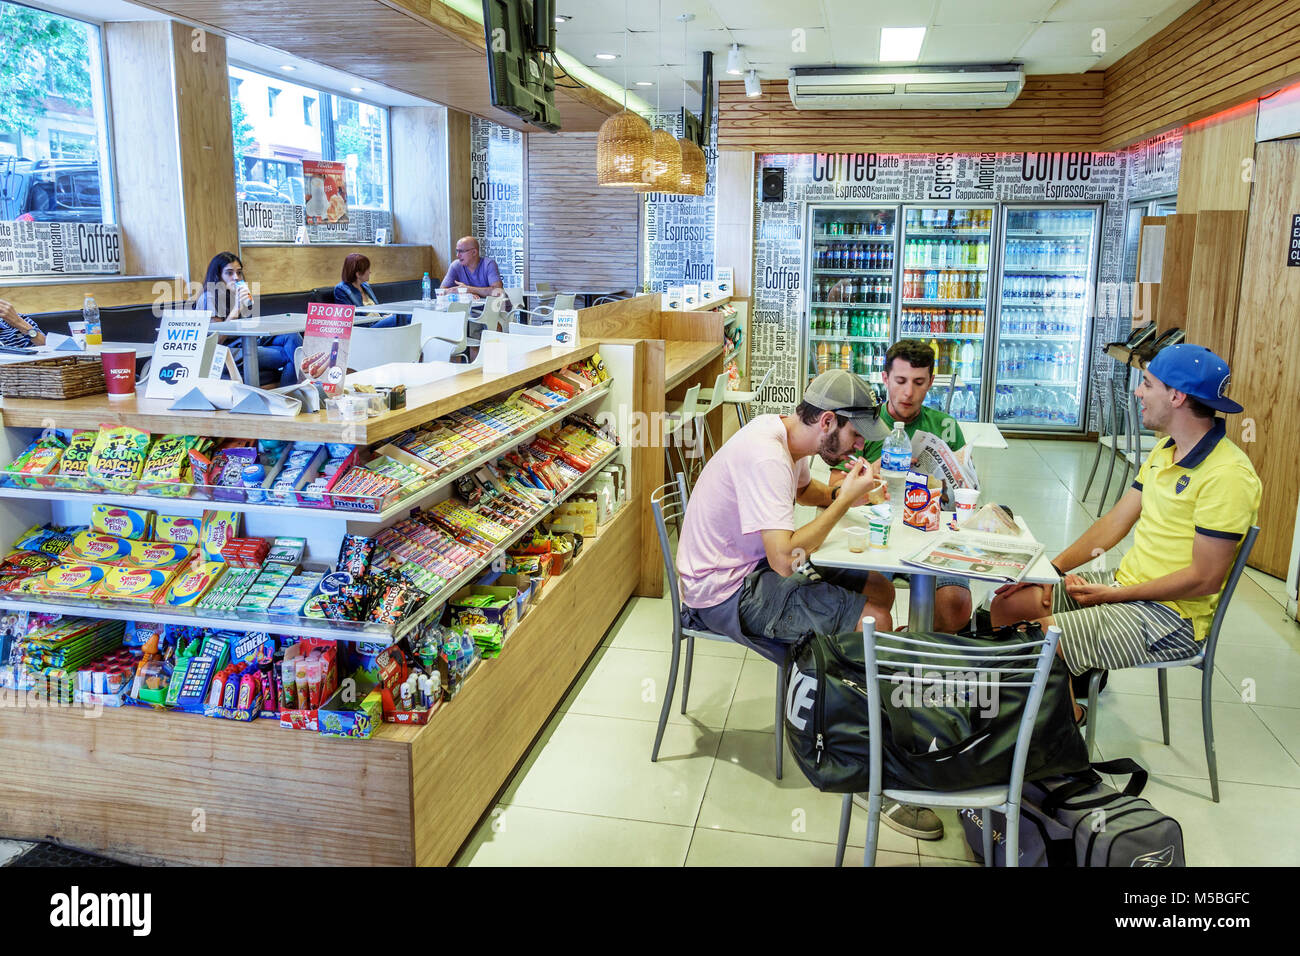 Buenos Aires Argentina,convenience store,cafe,sundries,snacks,Hispanic Latin Latino ethnic minority,adult adults man men male,sitting seated,eating,vi Stock Photo